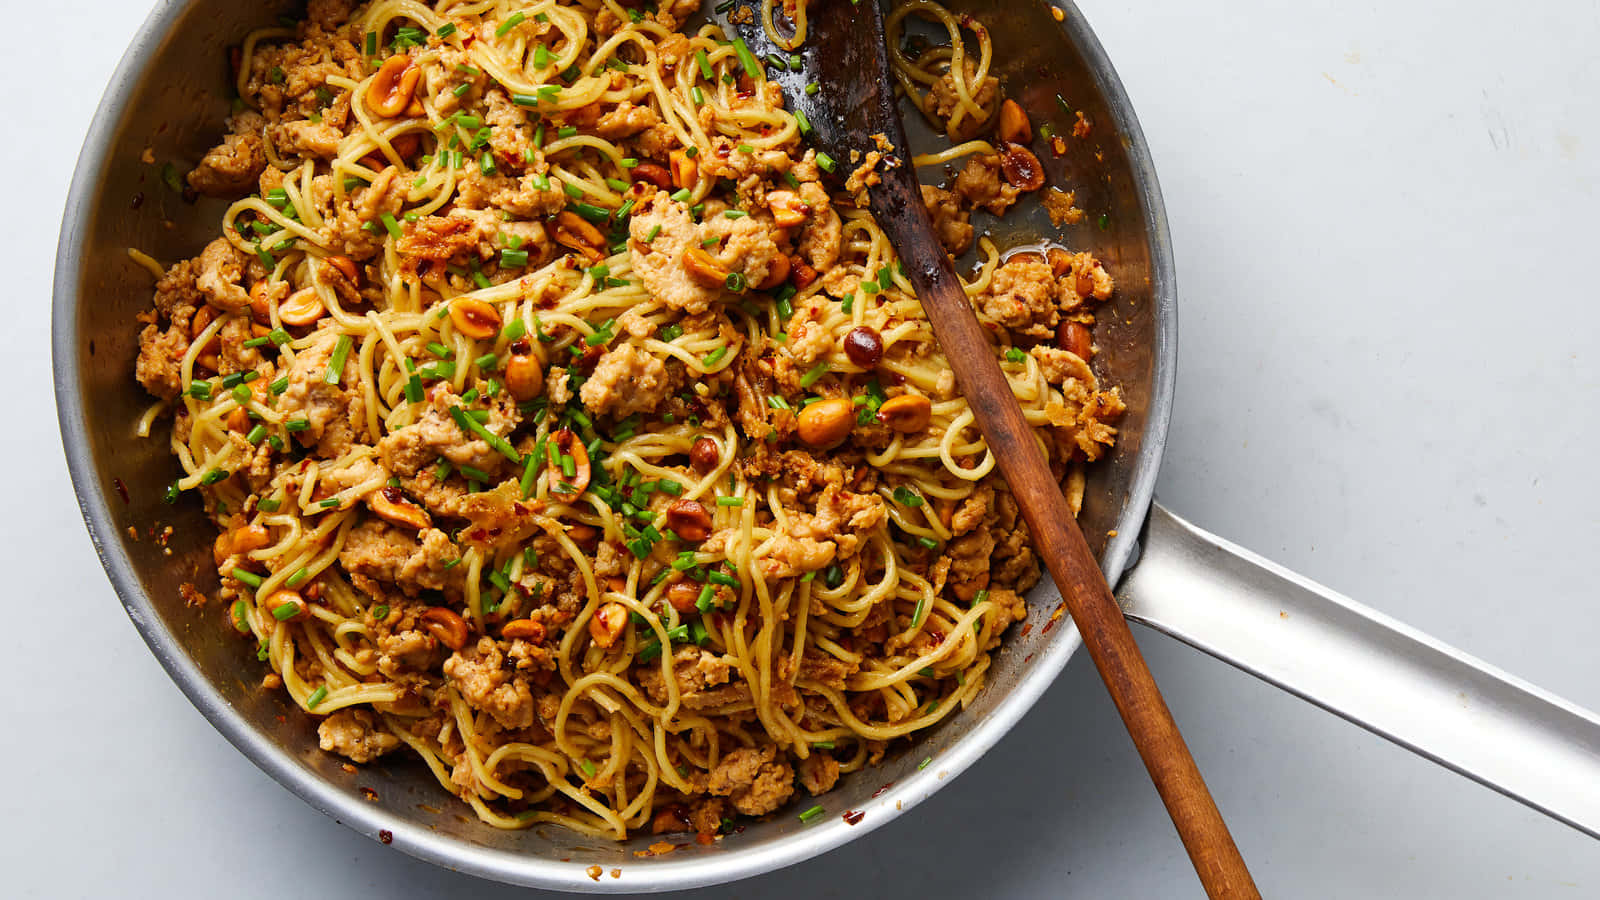 Spicy Sesame Noodles With Chicken And Peanuts Wallpaper